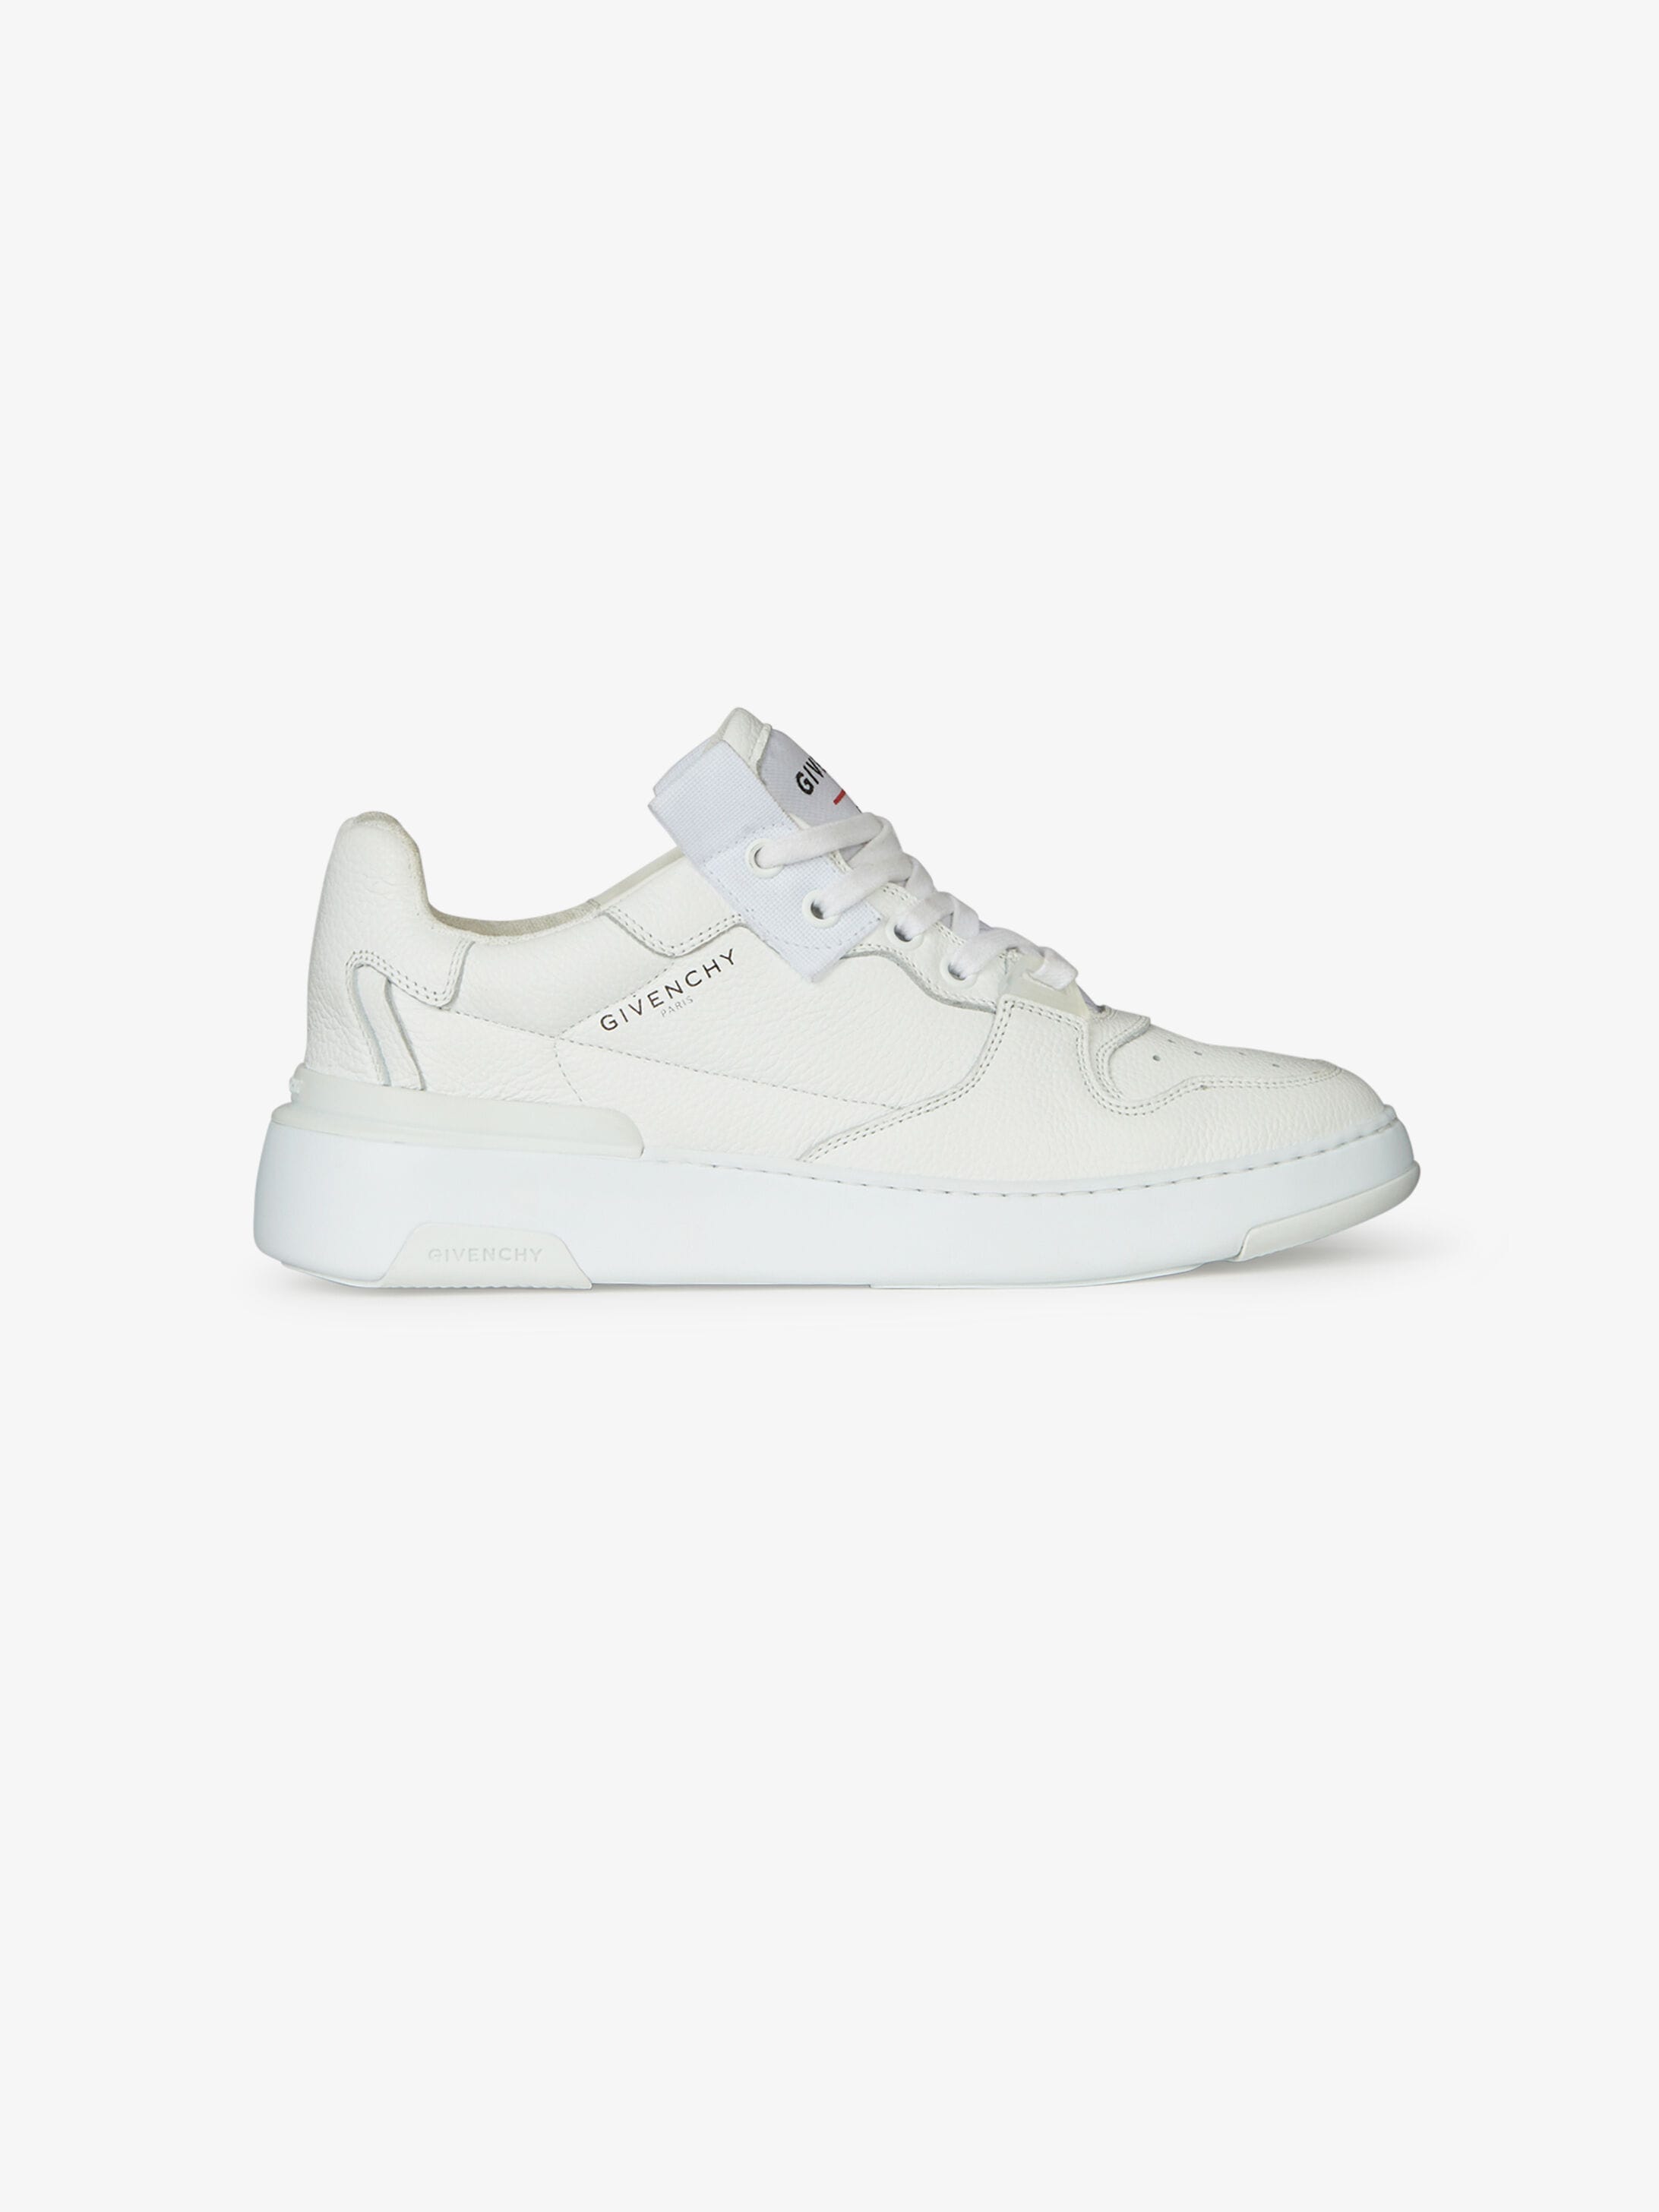 givenchy trainers womens uk